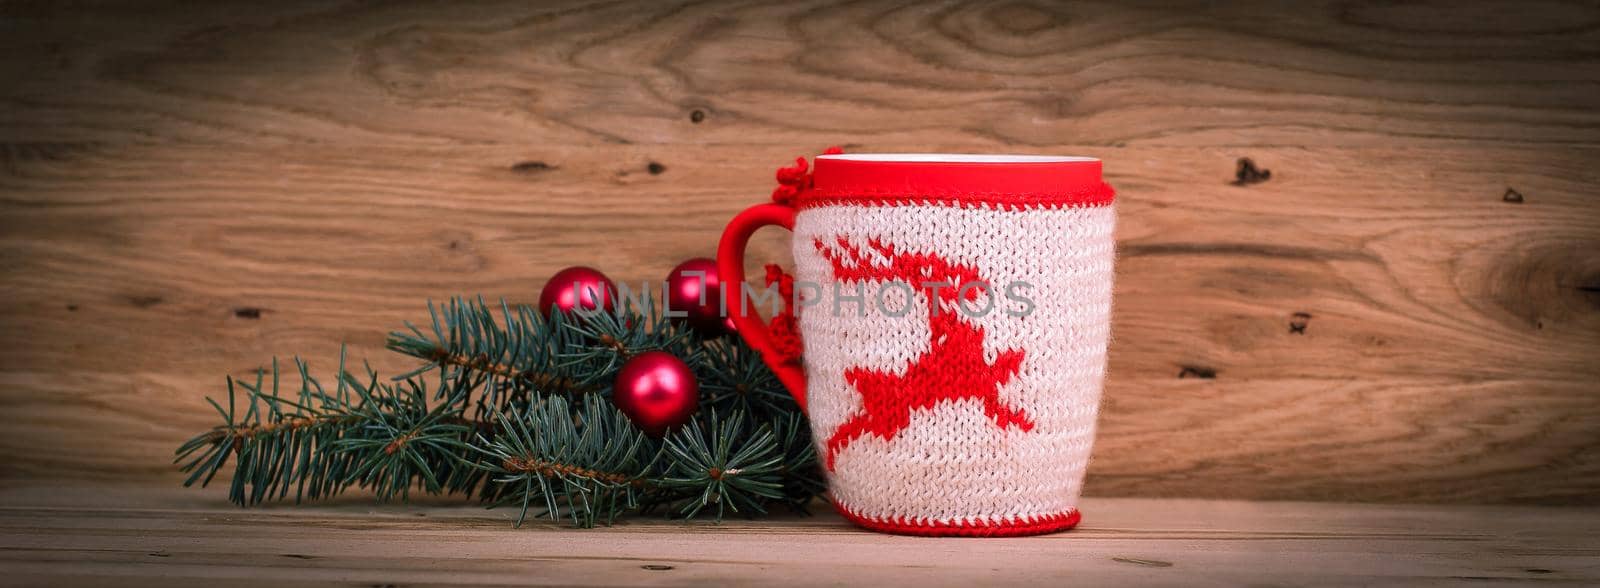 Christmas Cup and fir branch on wooden background by SmartPhotoLab